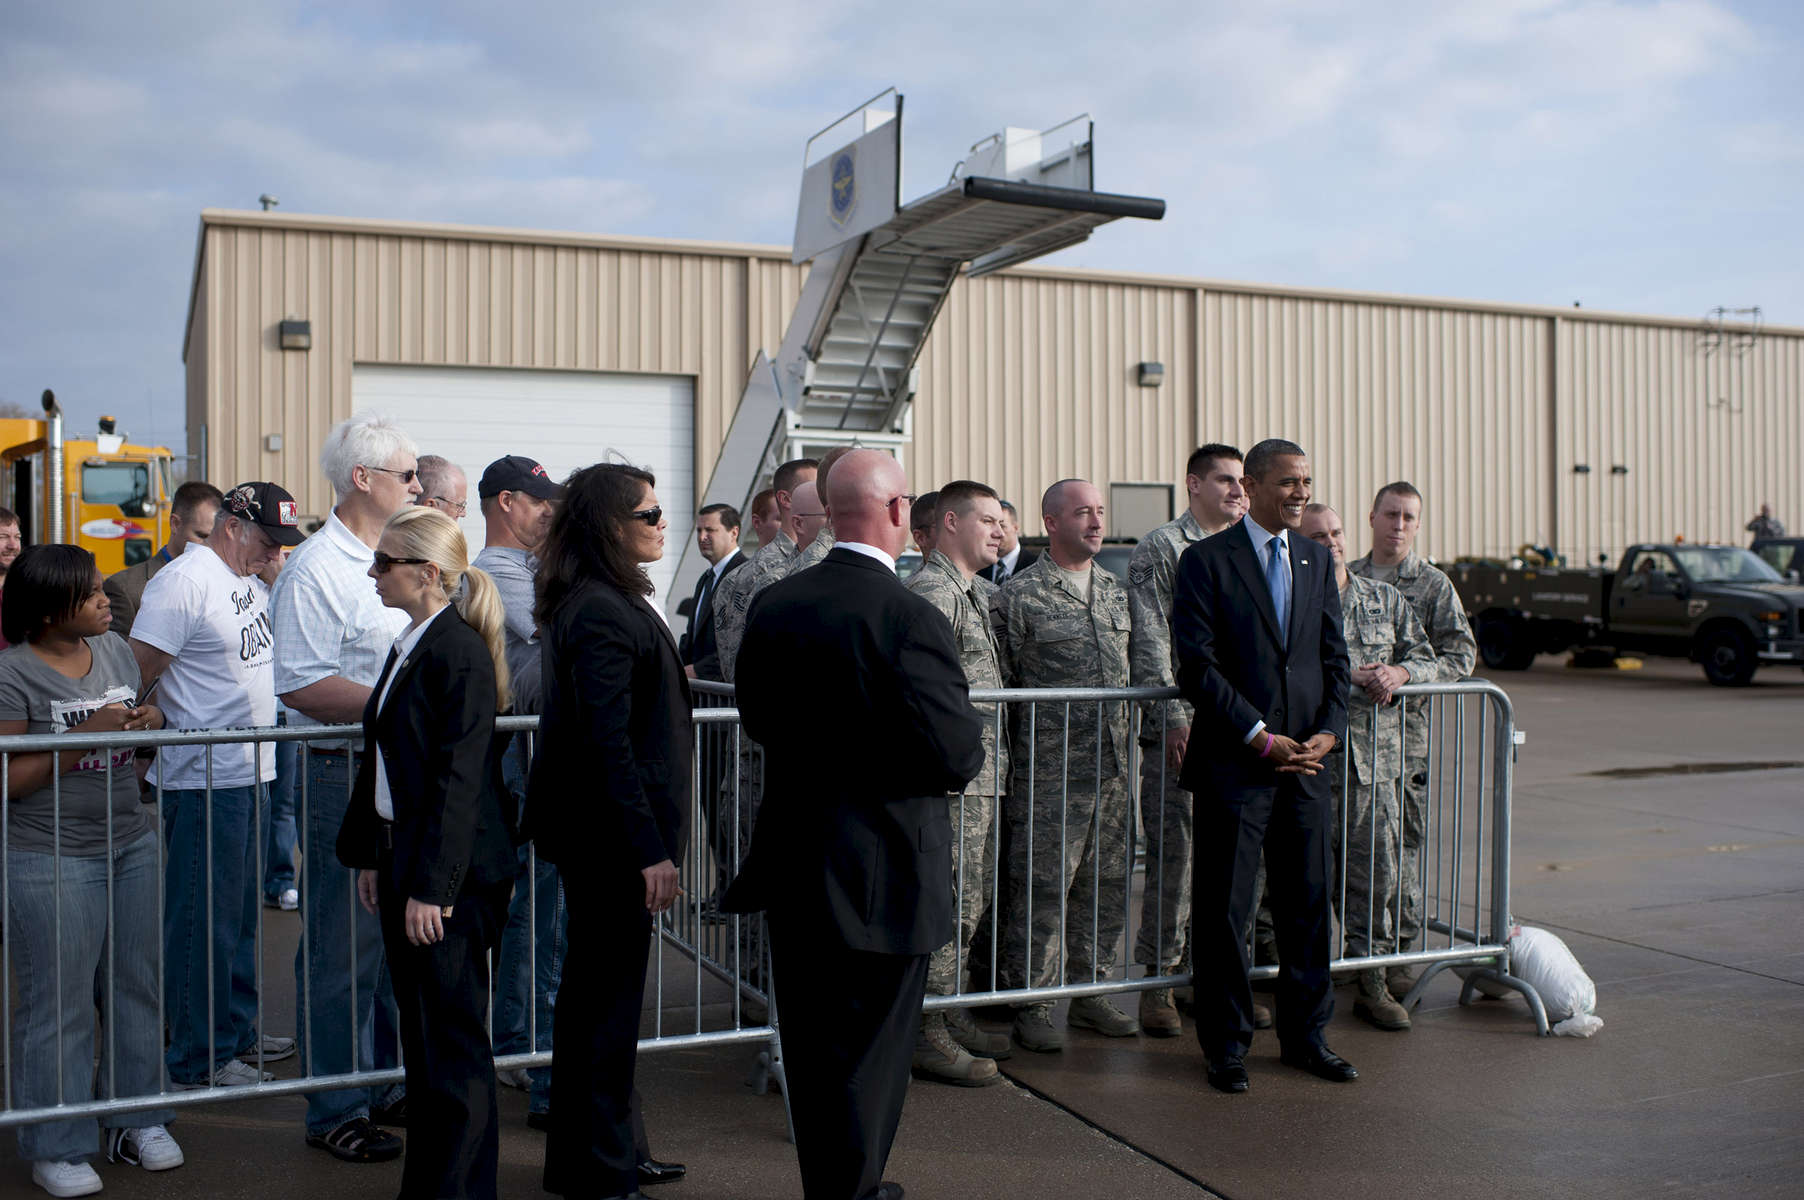 October 24, 2012 - Moline, IL:  President Barack Obama poses for a picture with servicemen at the airport in Moline, IL on his first stop on a whirlwind 48 hours of straight campaigning. (Scout Tufankjian for Obama for America/Polaris)